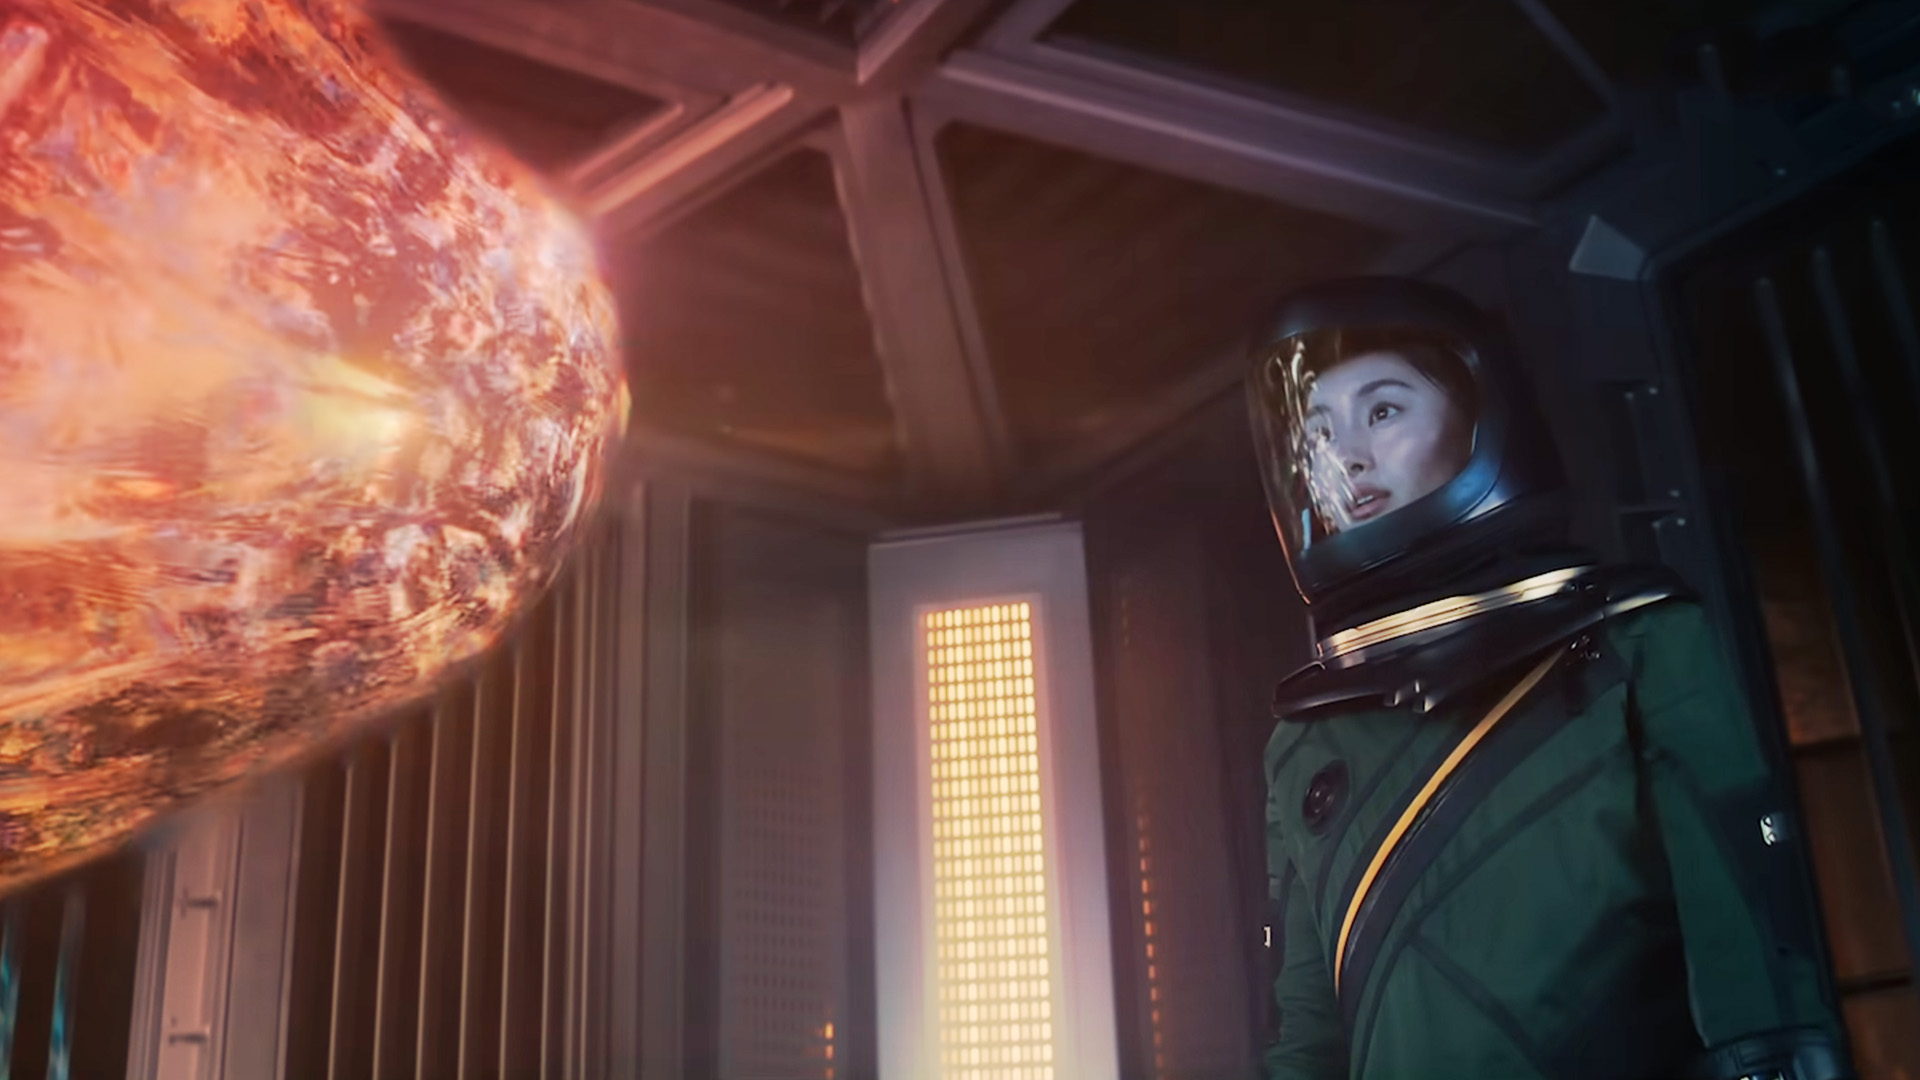 Invasion Season 2 Enters A War of the Worlds In Trailer.